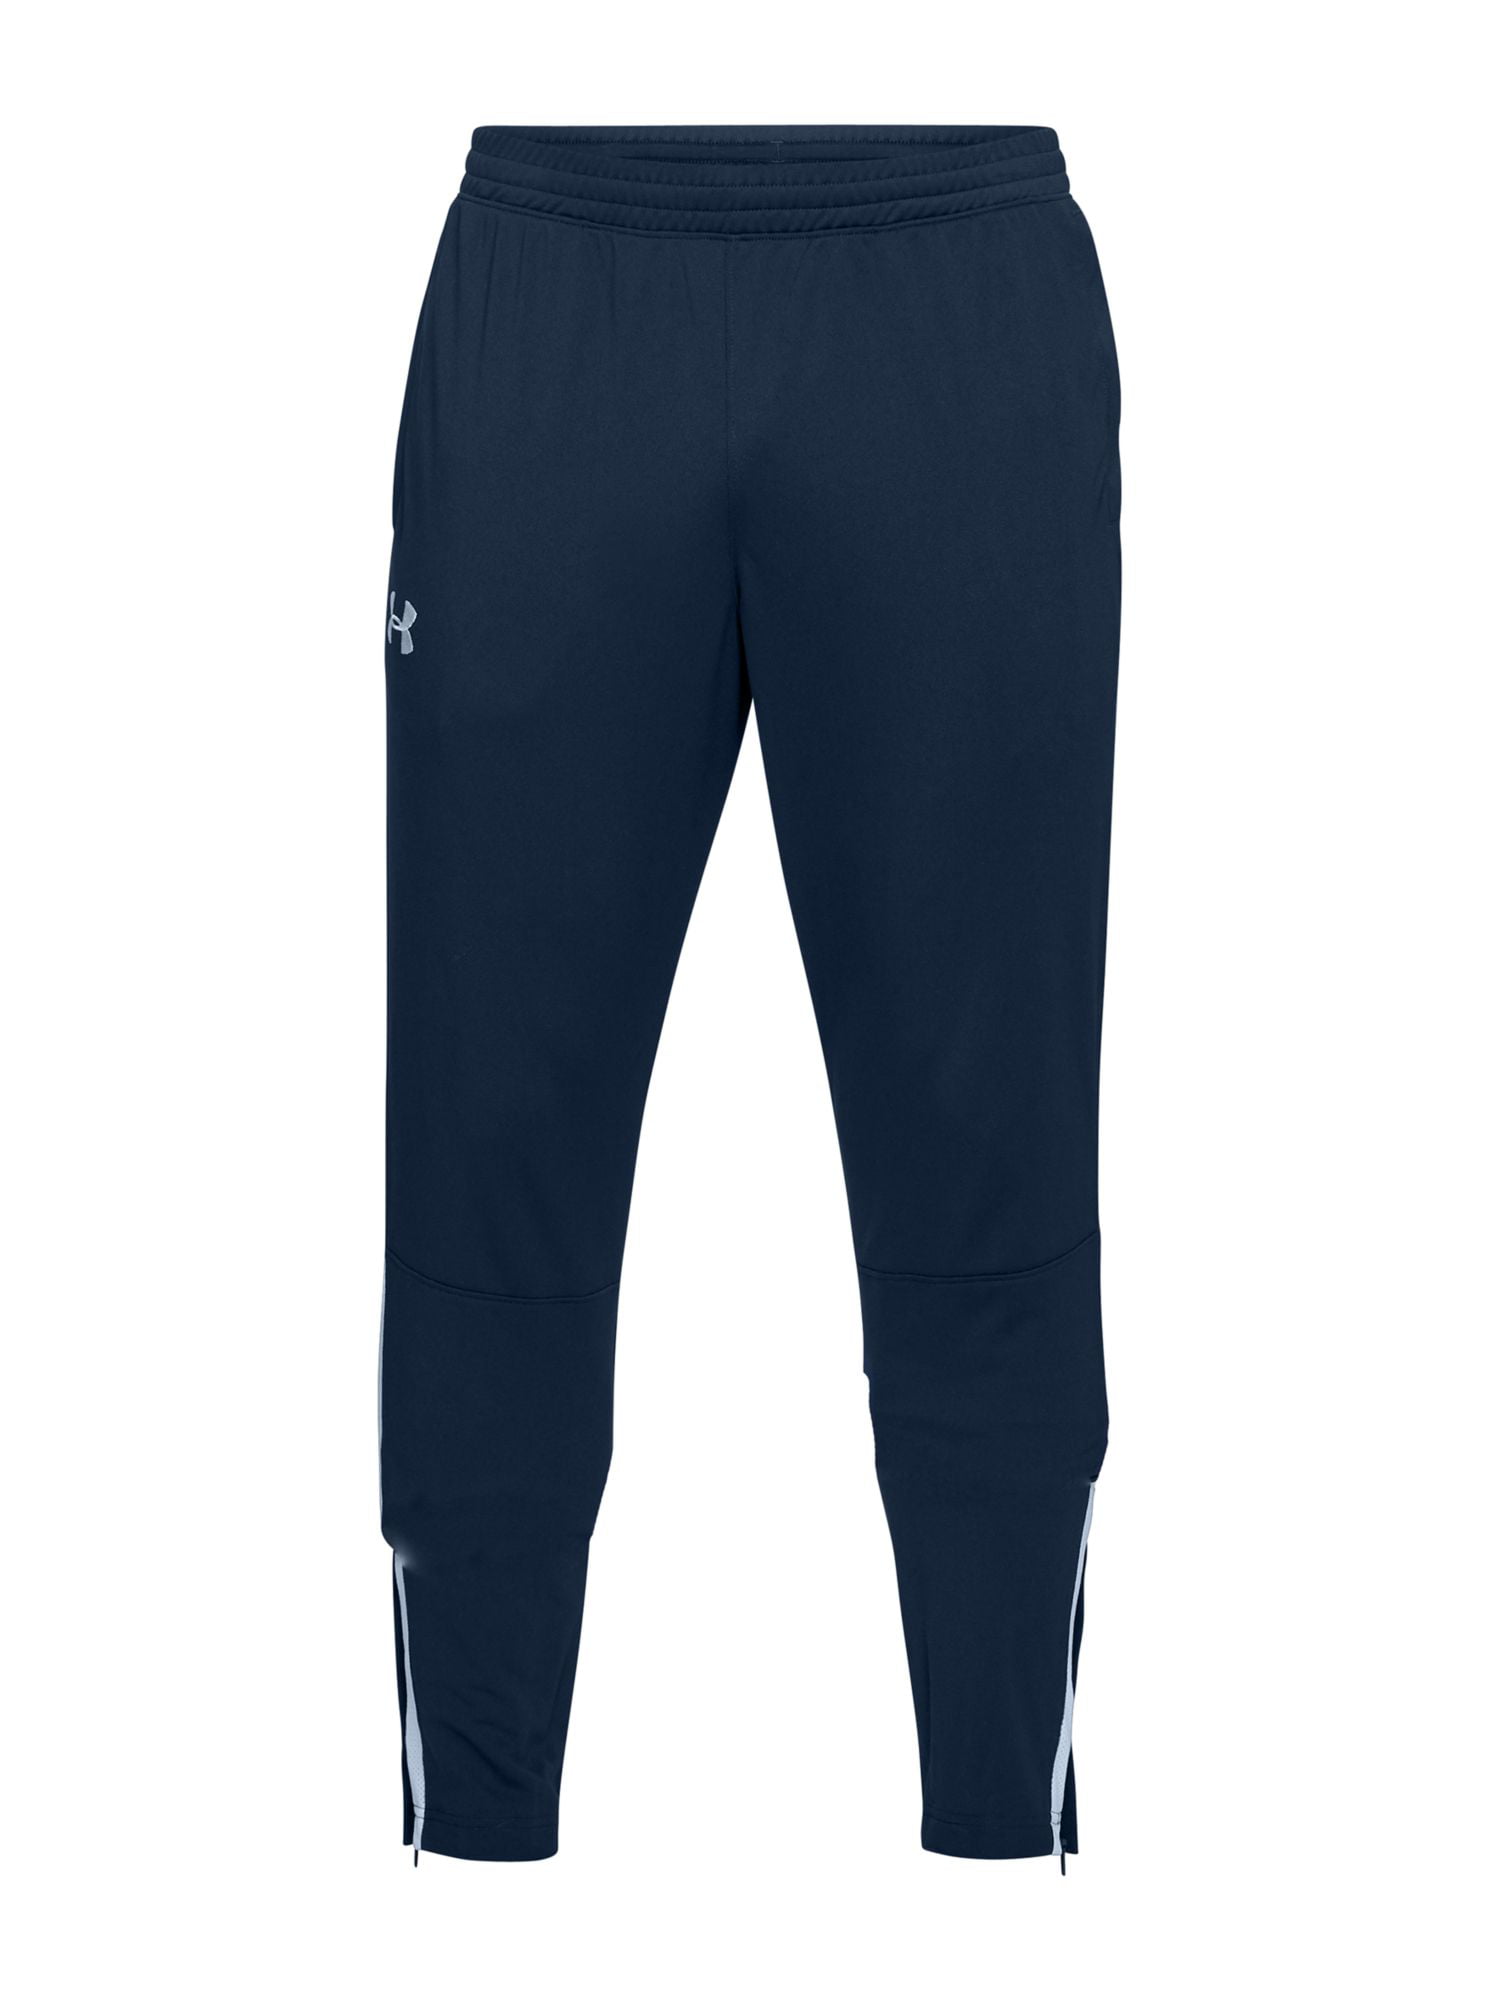 Graphic Stretch, Tapered, UNDER Pants Wicking XXLT Mens Navy ARMOUR Logo Moisture